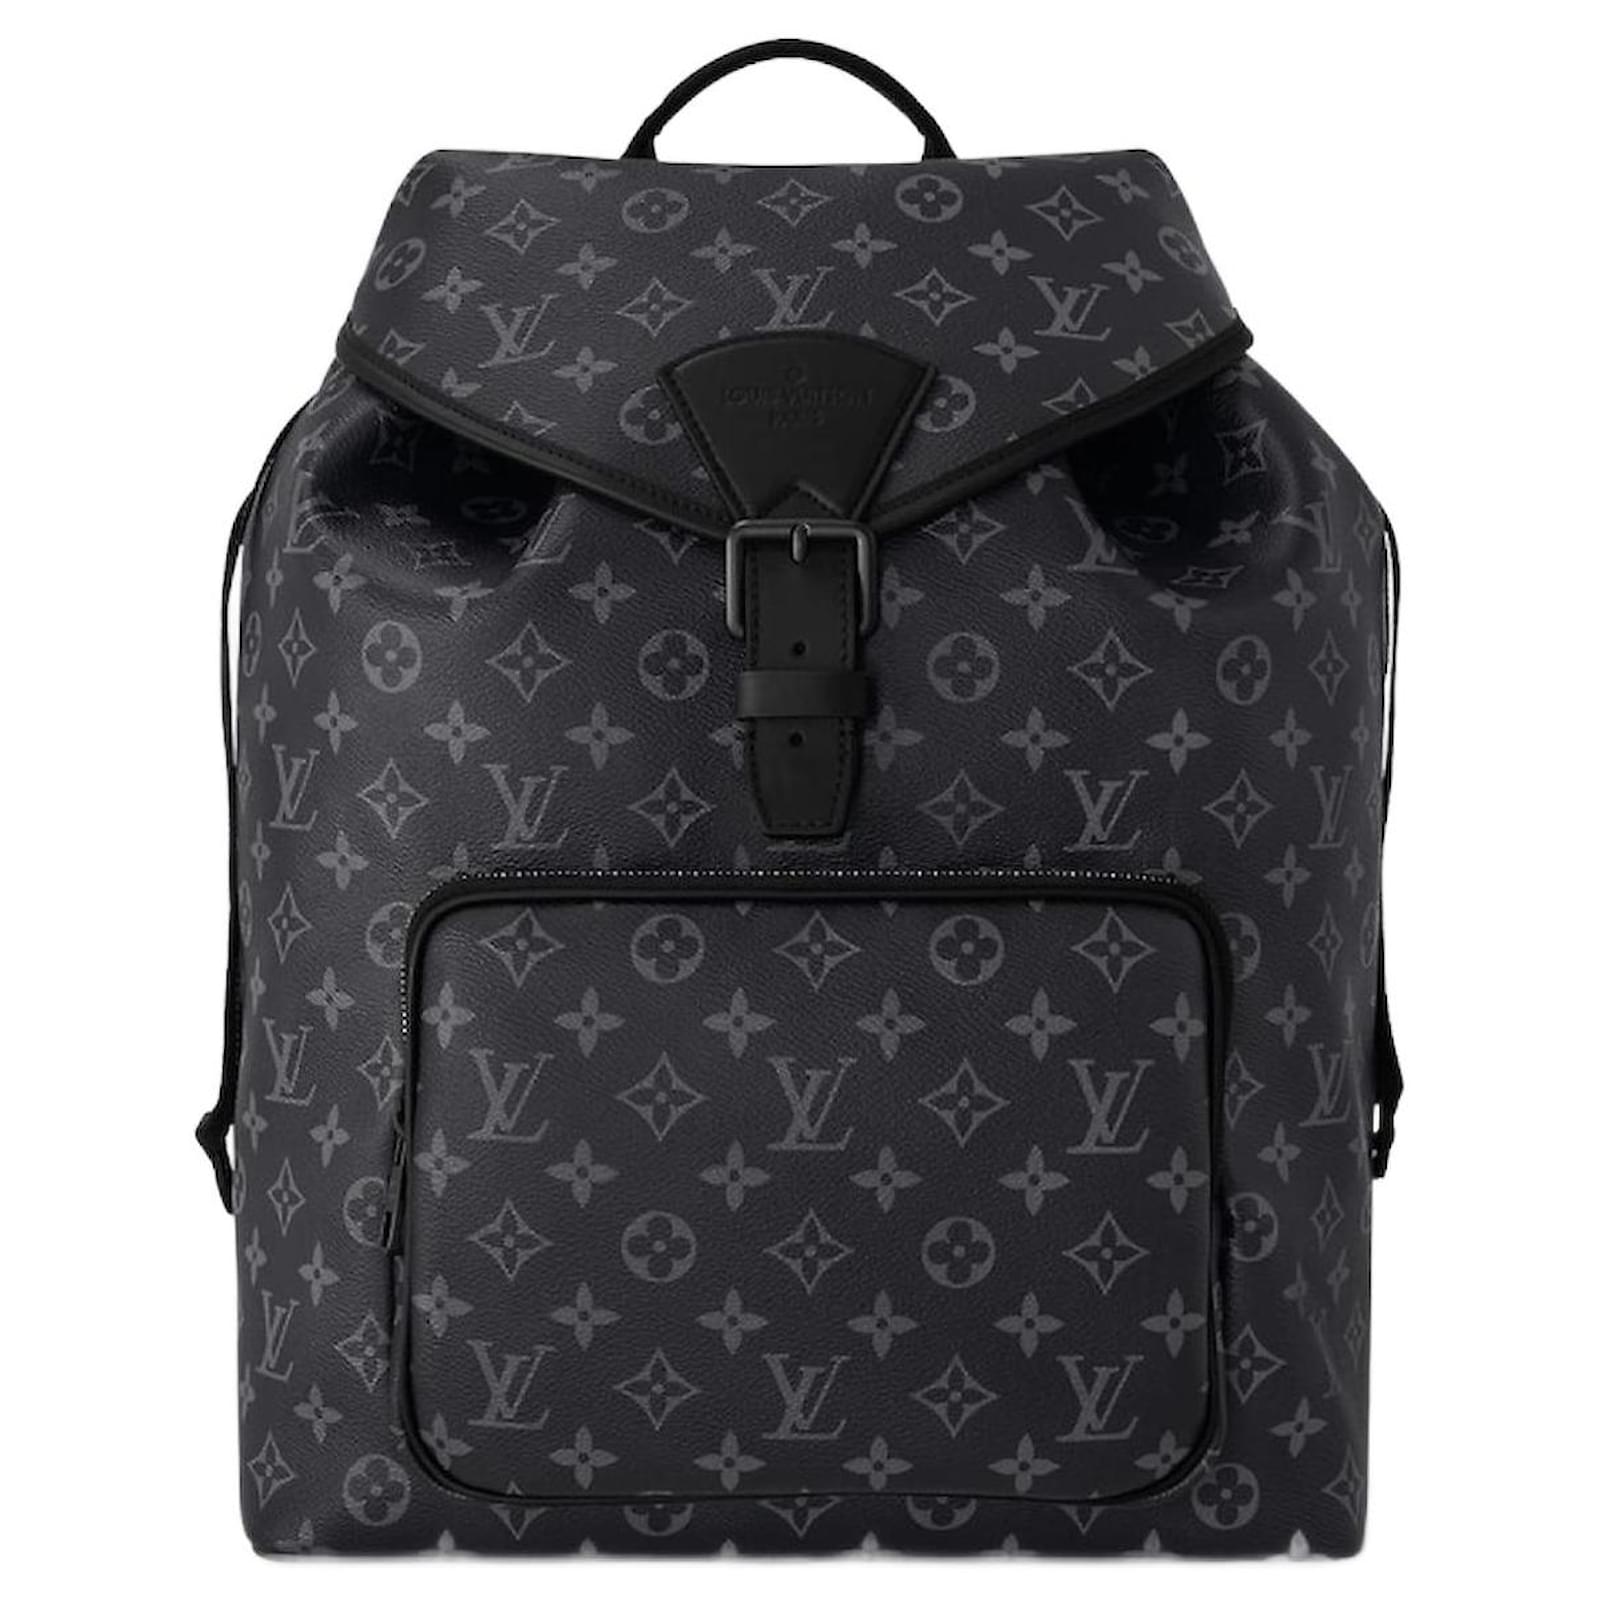 Louis Vuitton Montsouris Grey Canvas Backpack Bag (Pre-Owned)